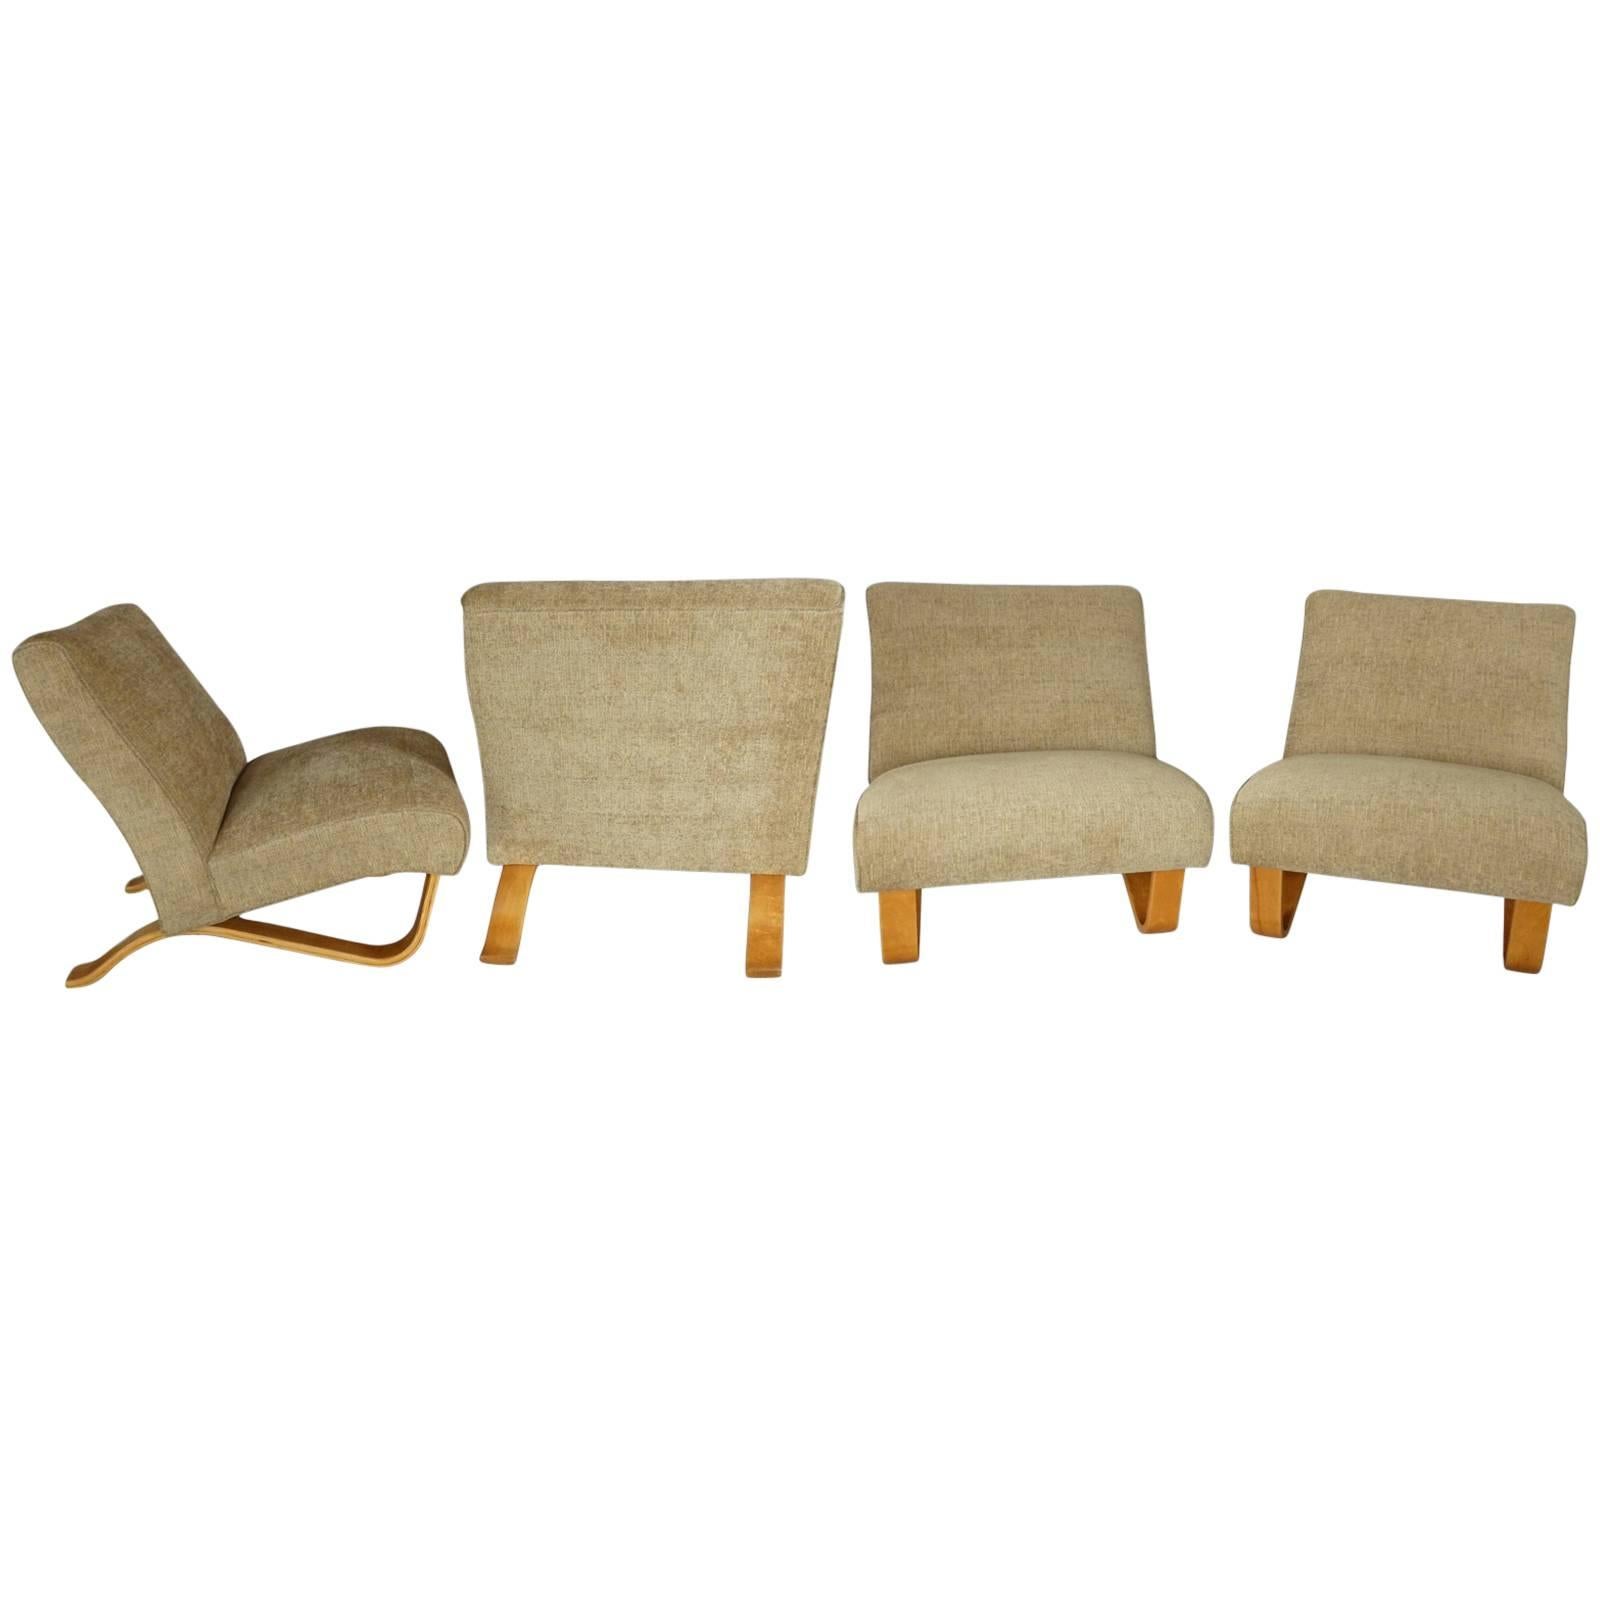 Set of Four Alvar Aalto Attributed Armless Lounge Chairs